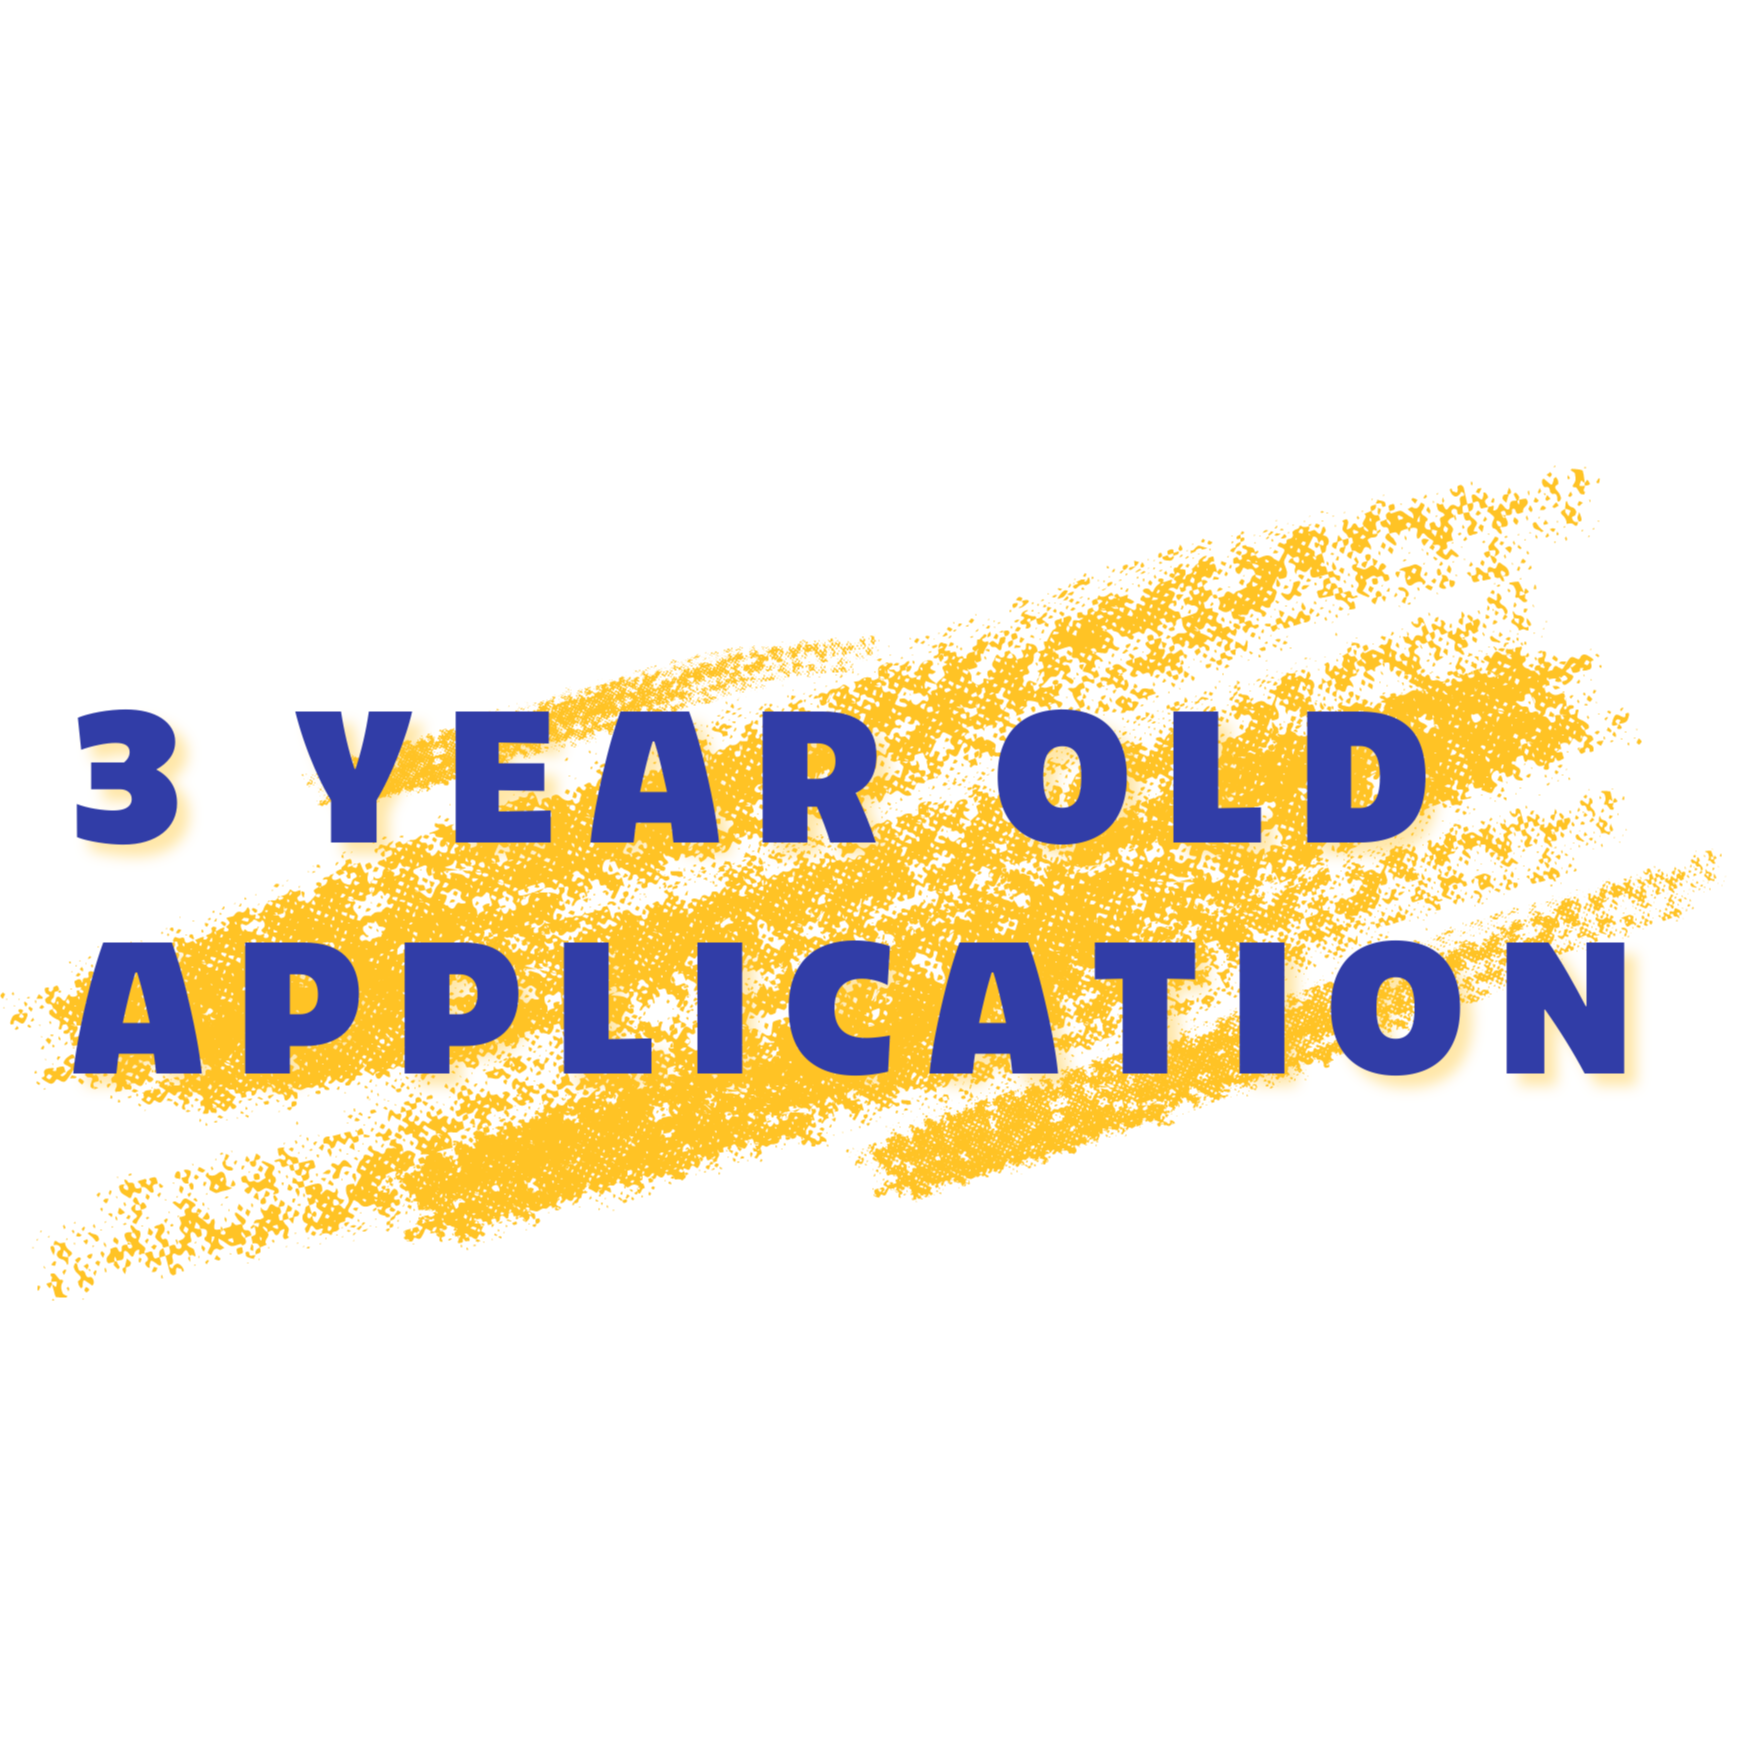 3 year old application